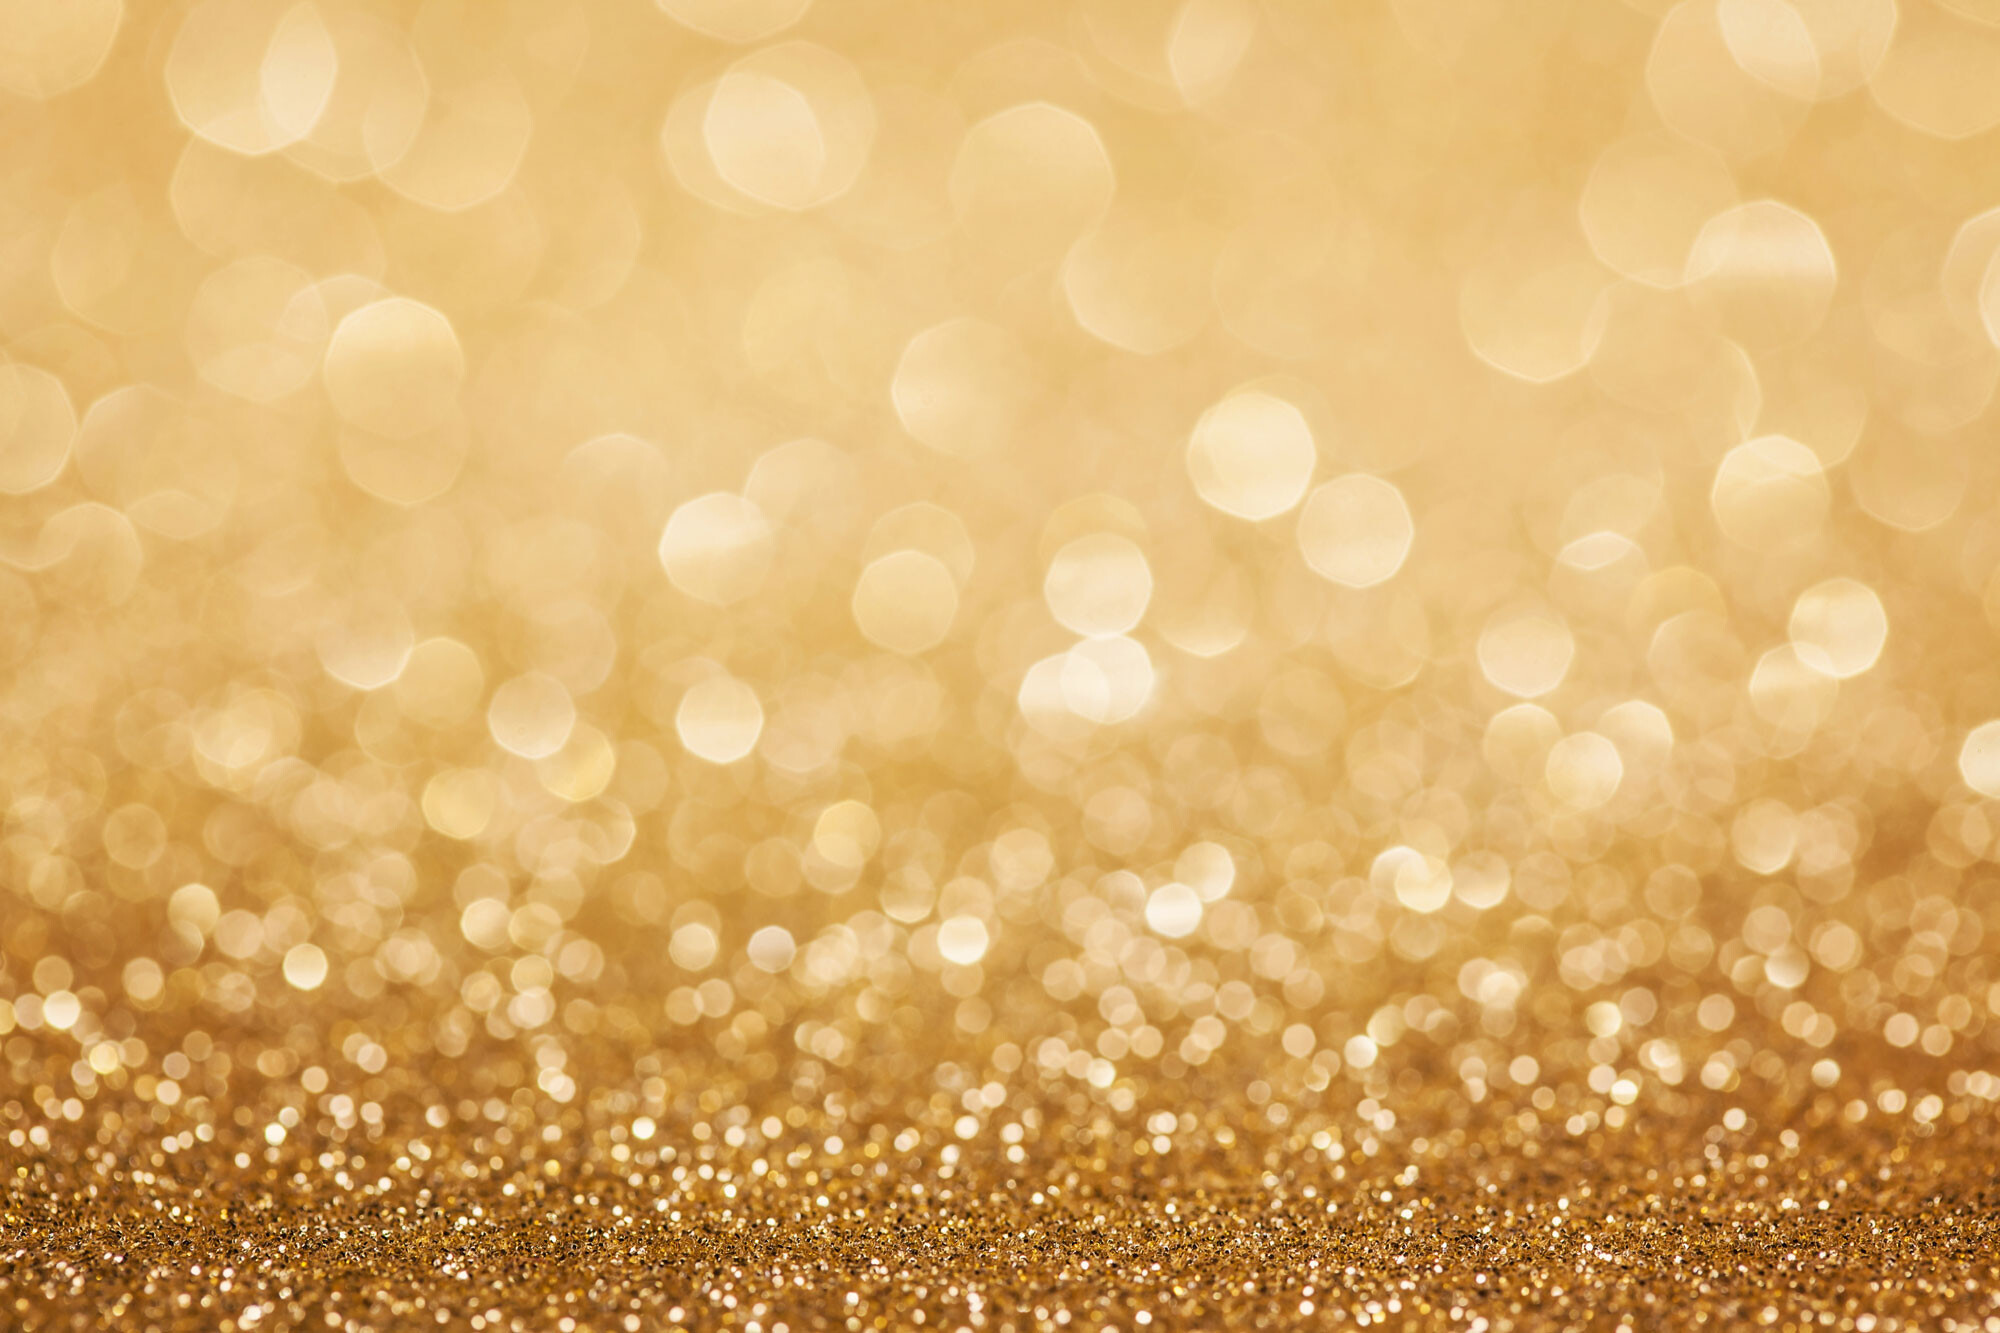 Gold Glitter: An assortment of small, reflective particles that come in a variety of shapes, sizes, and colors. 2000x1340 HD Wallpaper.